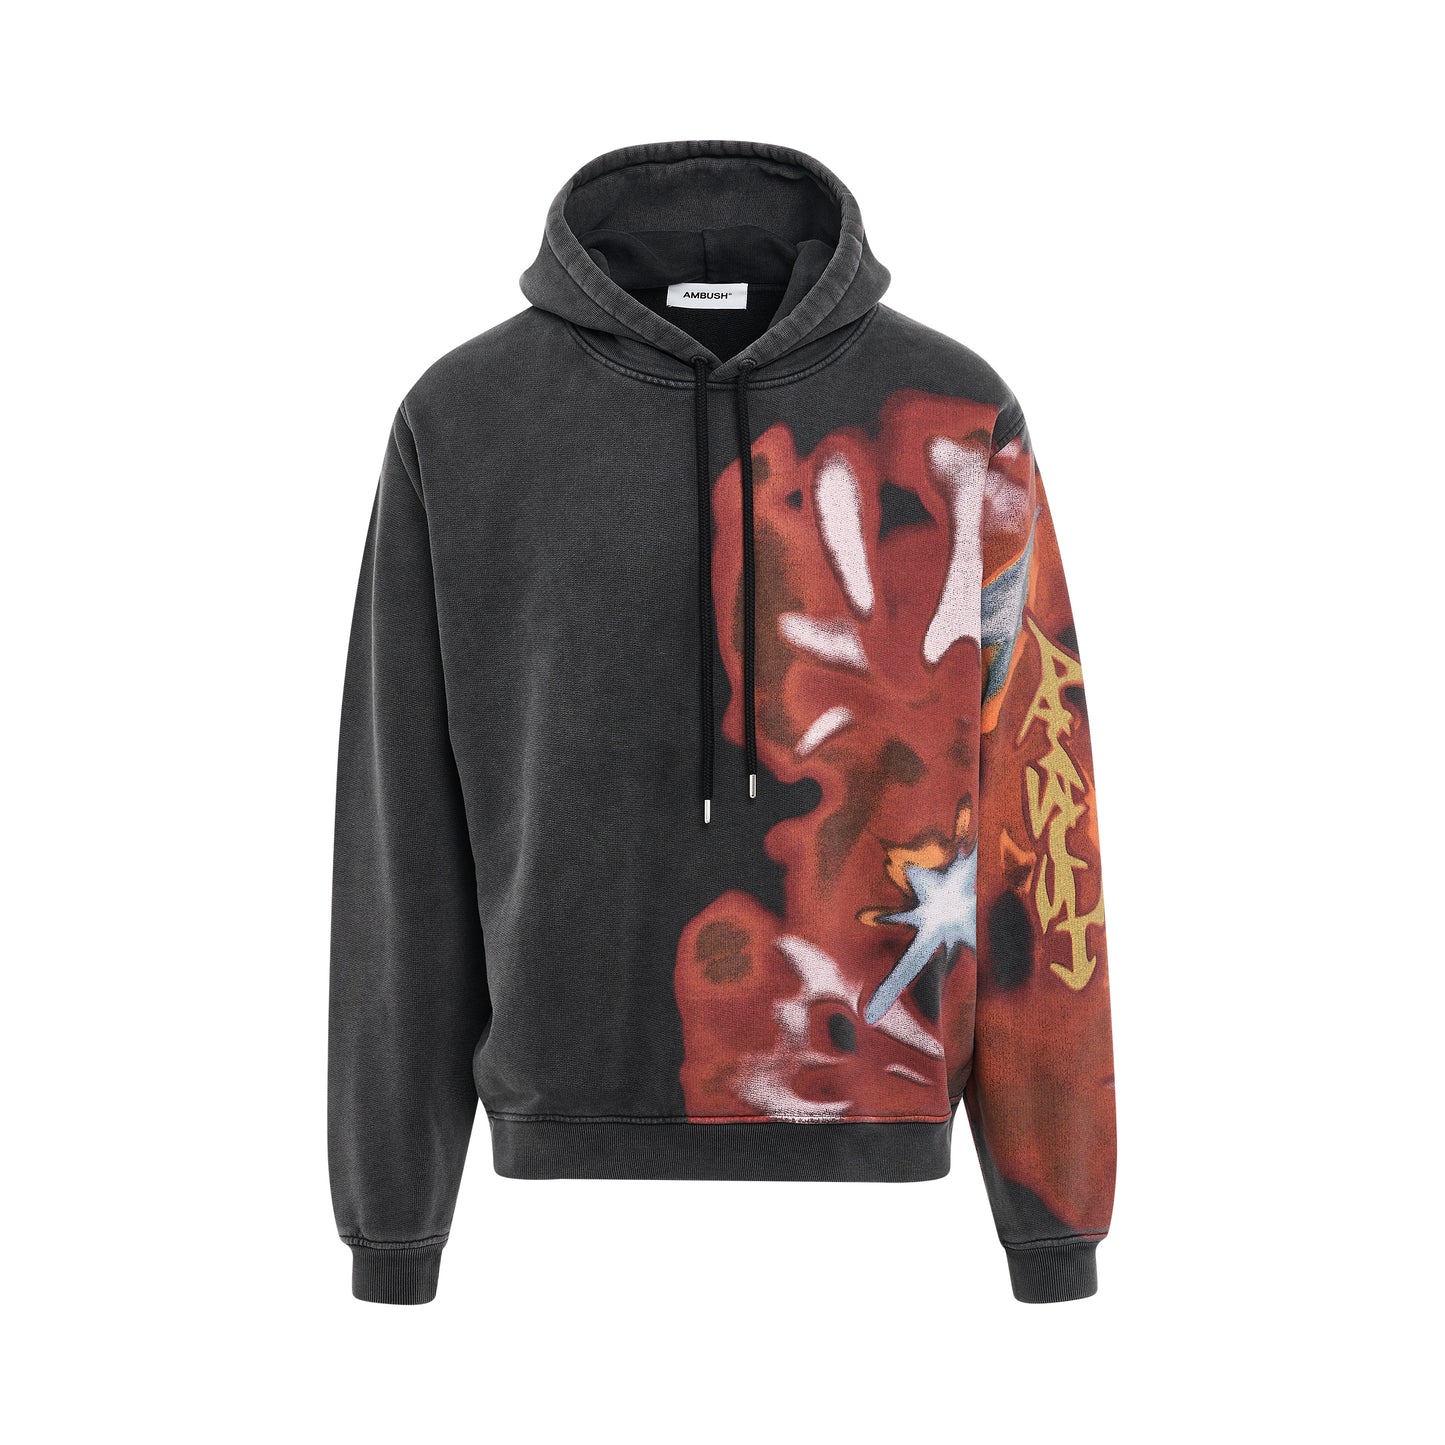 Abstract Graphic Hoodie in Black/Multicolour